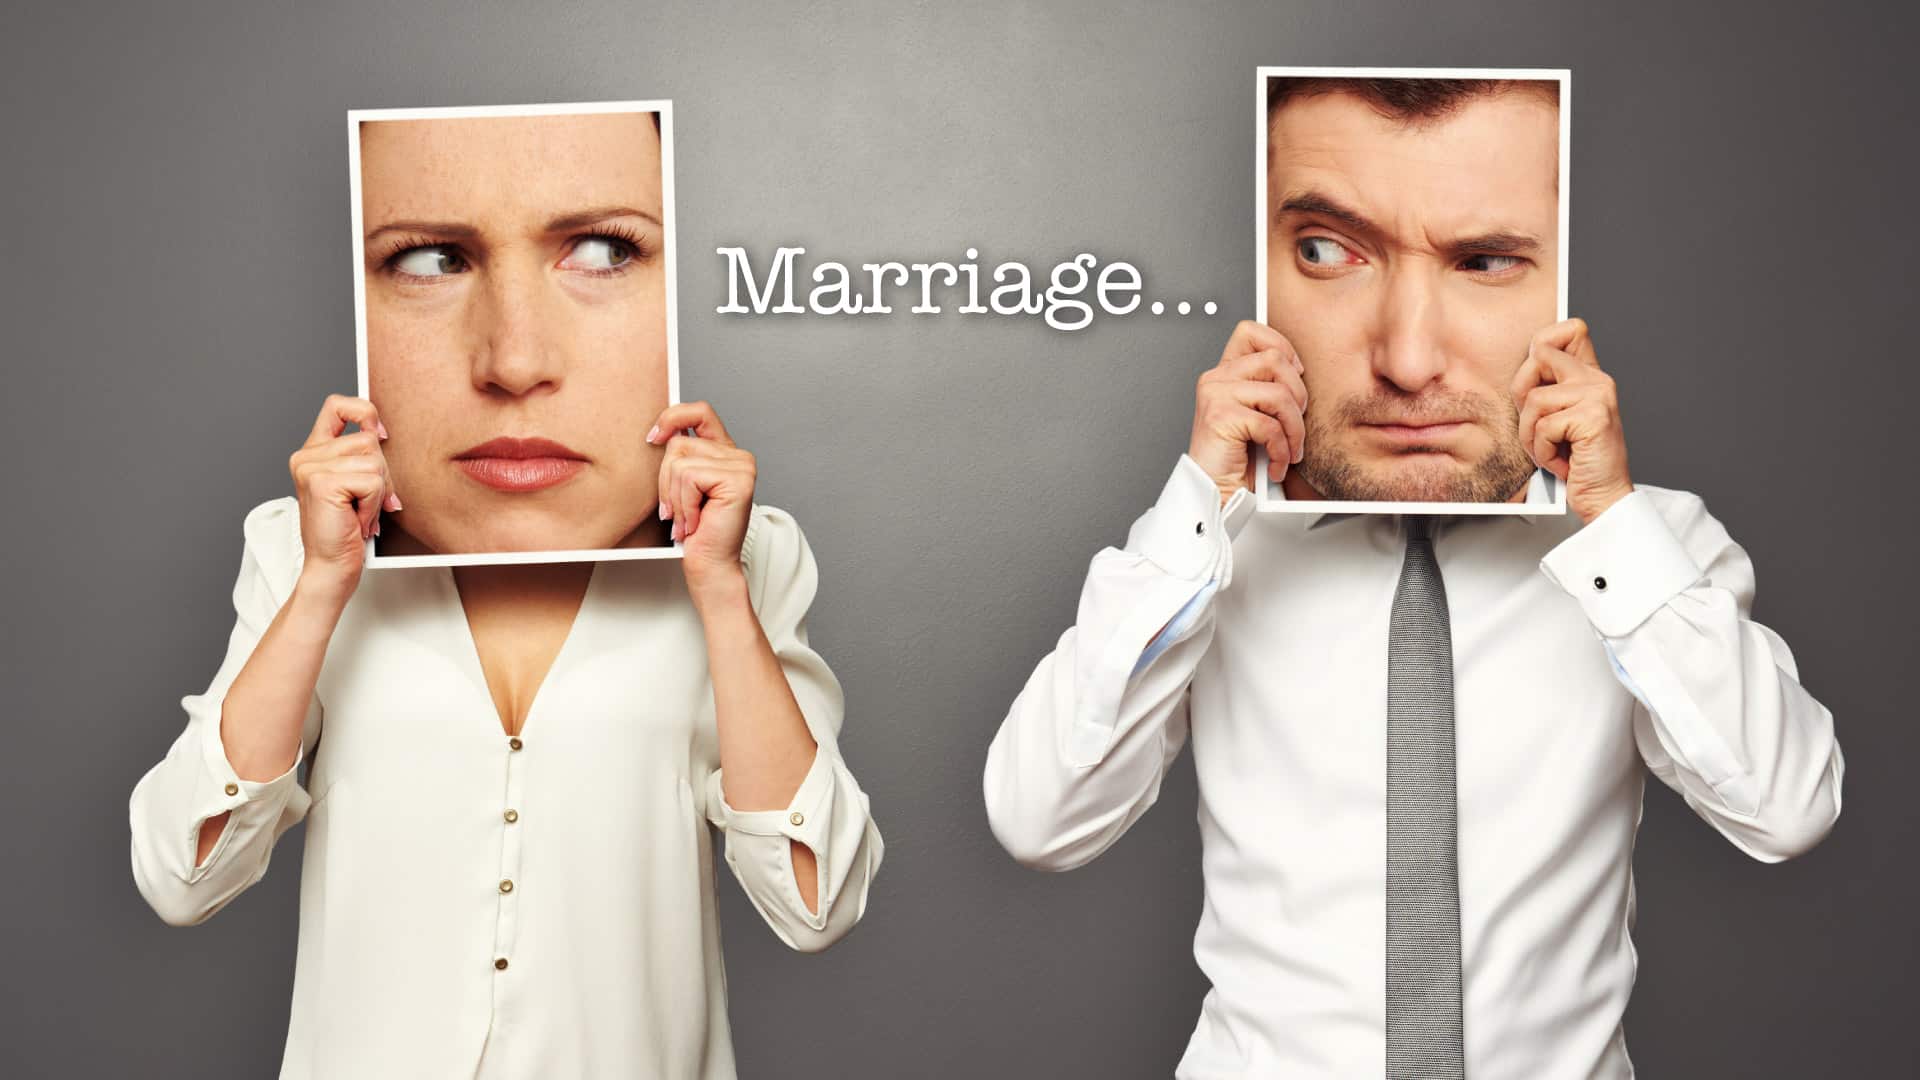 Marriage… graphic